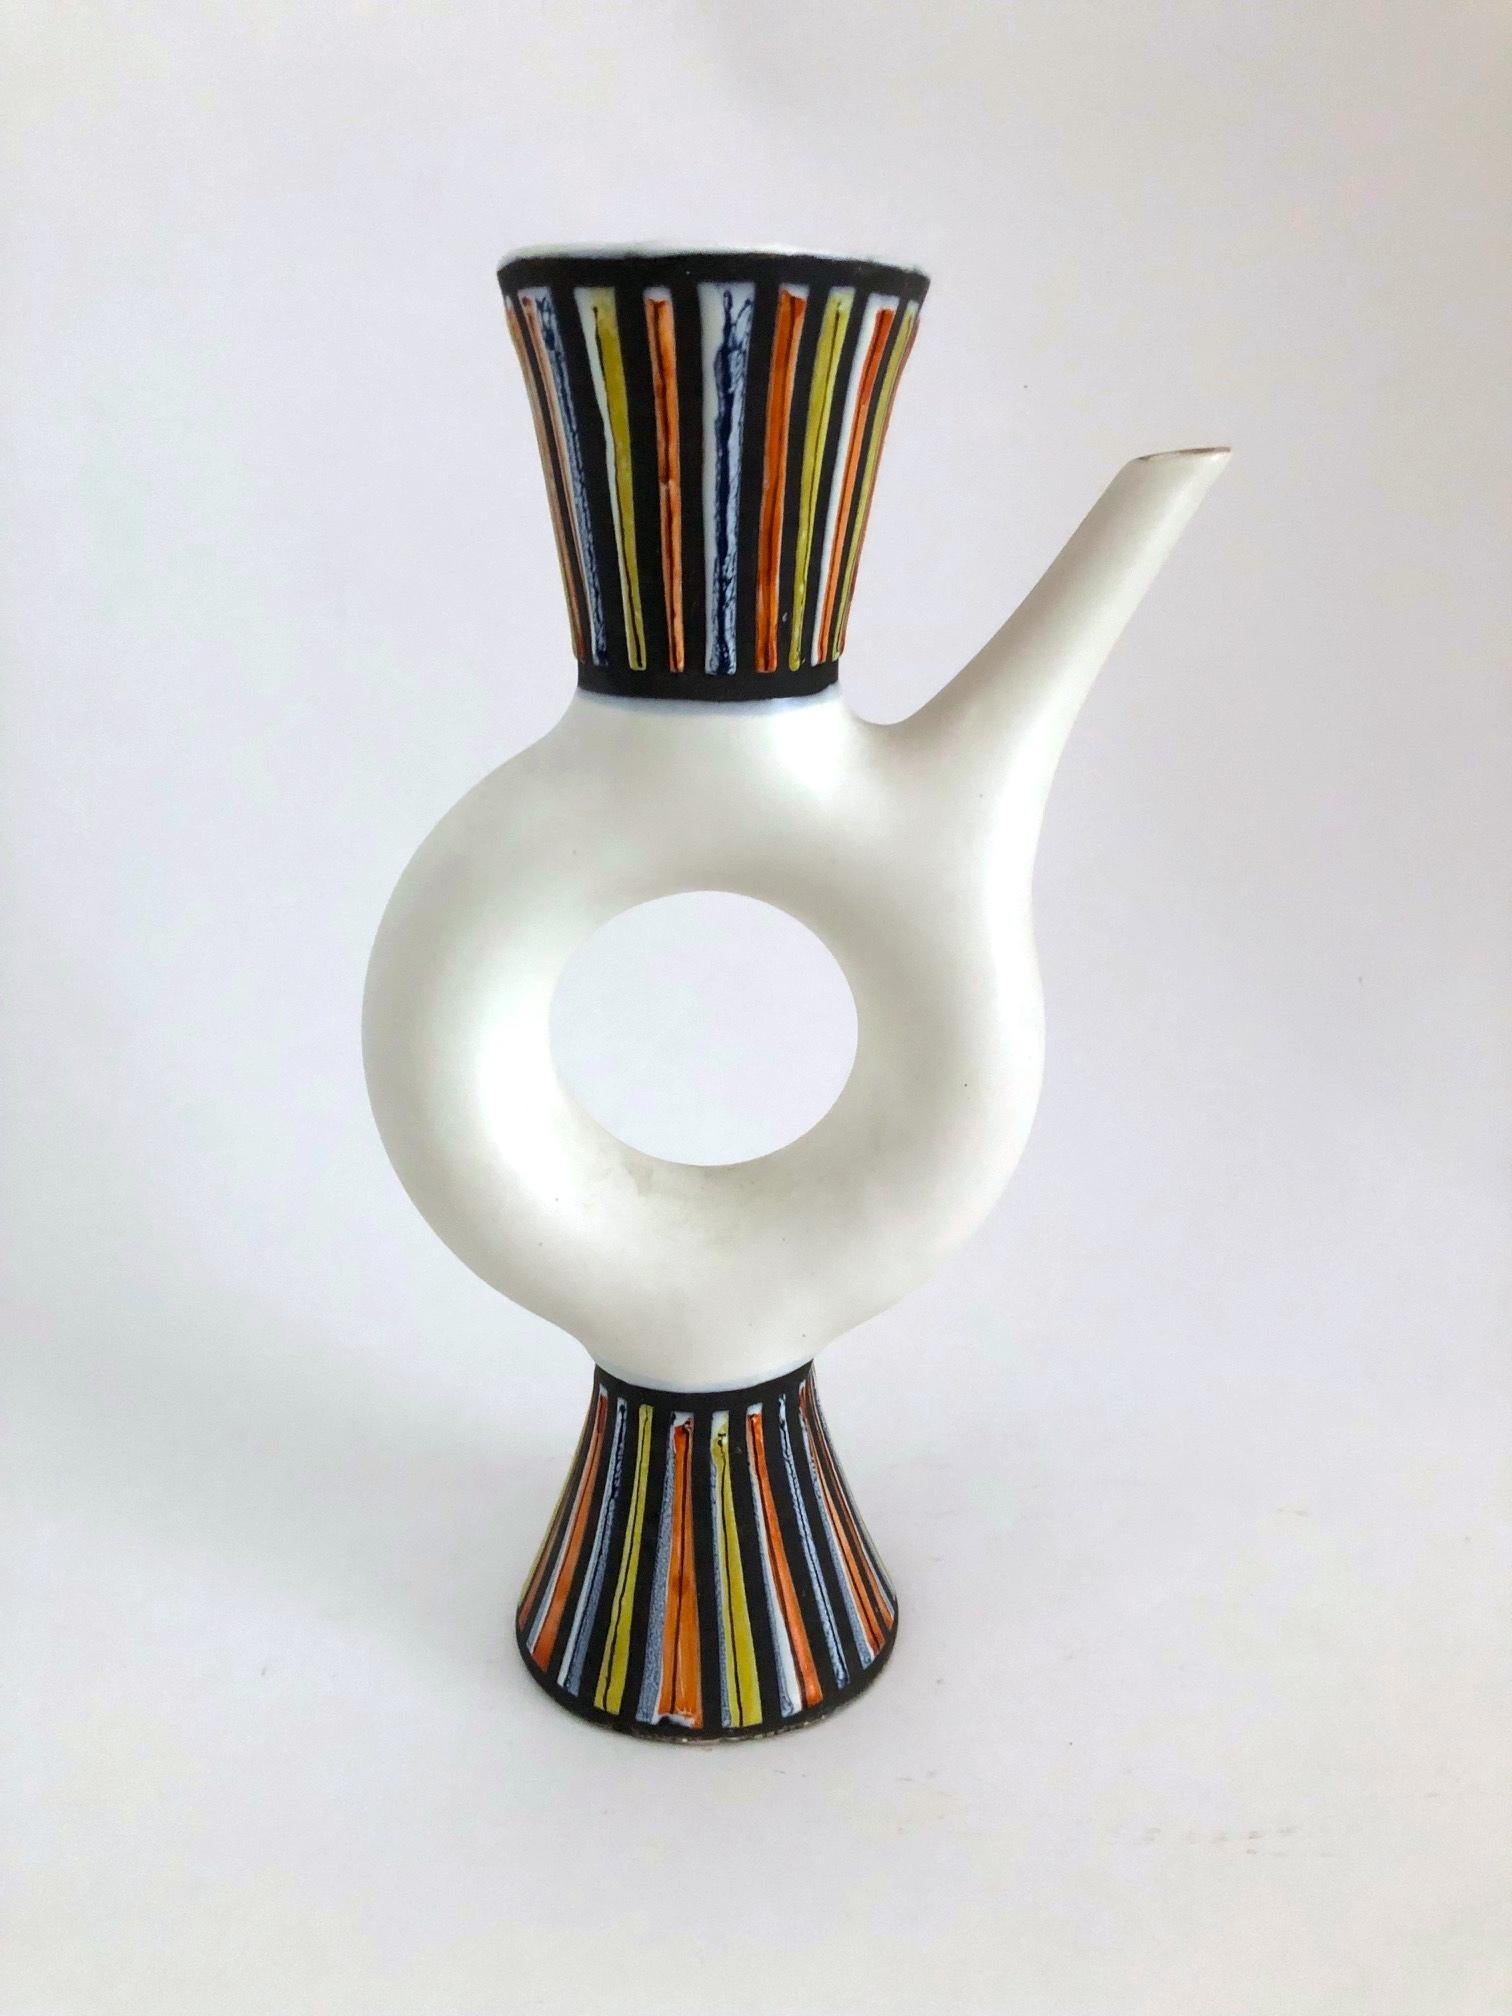 Pitcher by French ceramicist from Vallauris Roger Capron 1950s
Signed Capron Vallauris

Measures: H 33 cm.